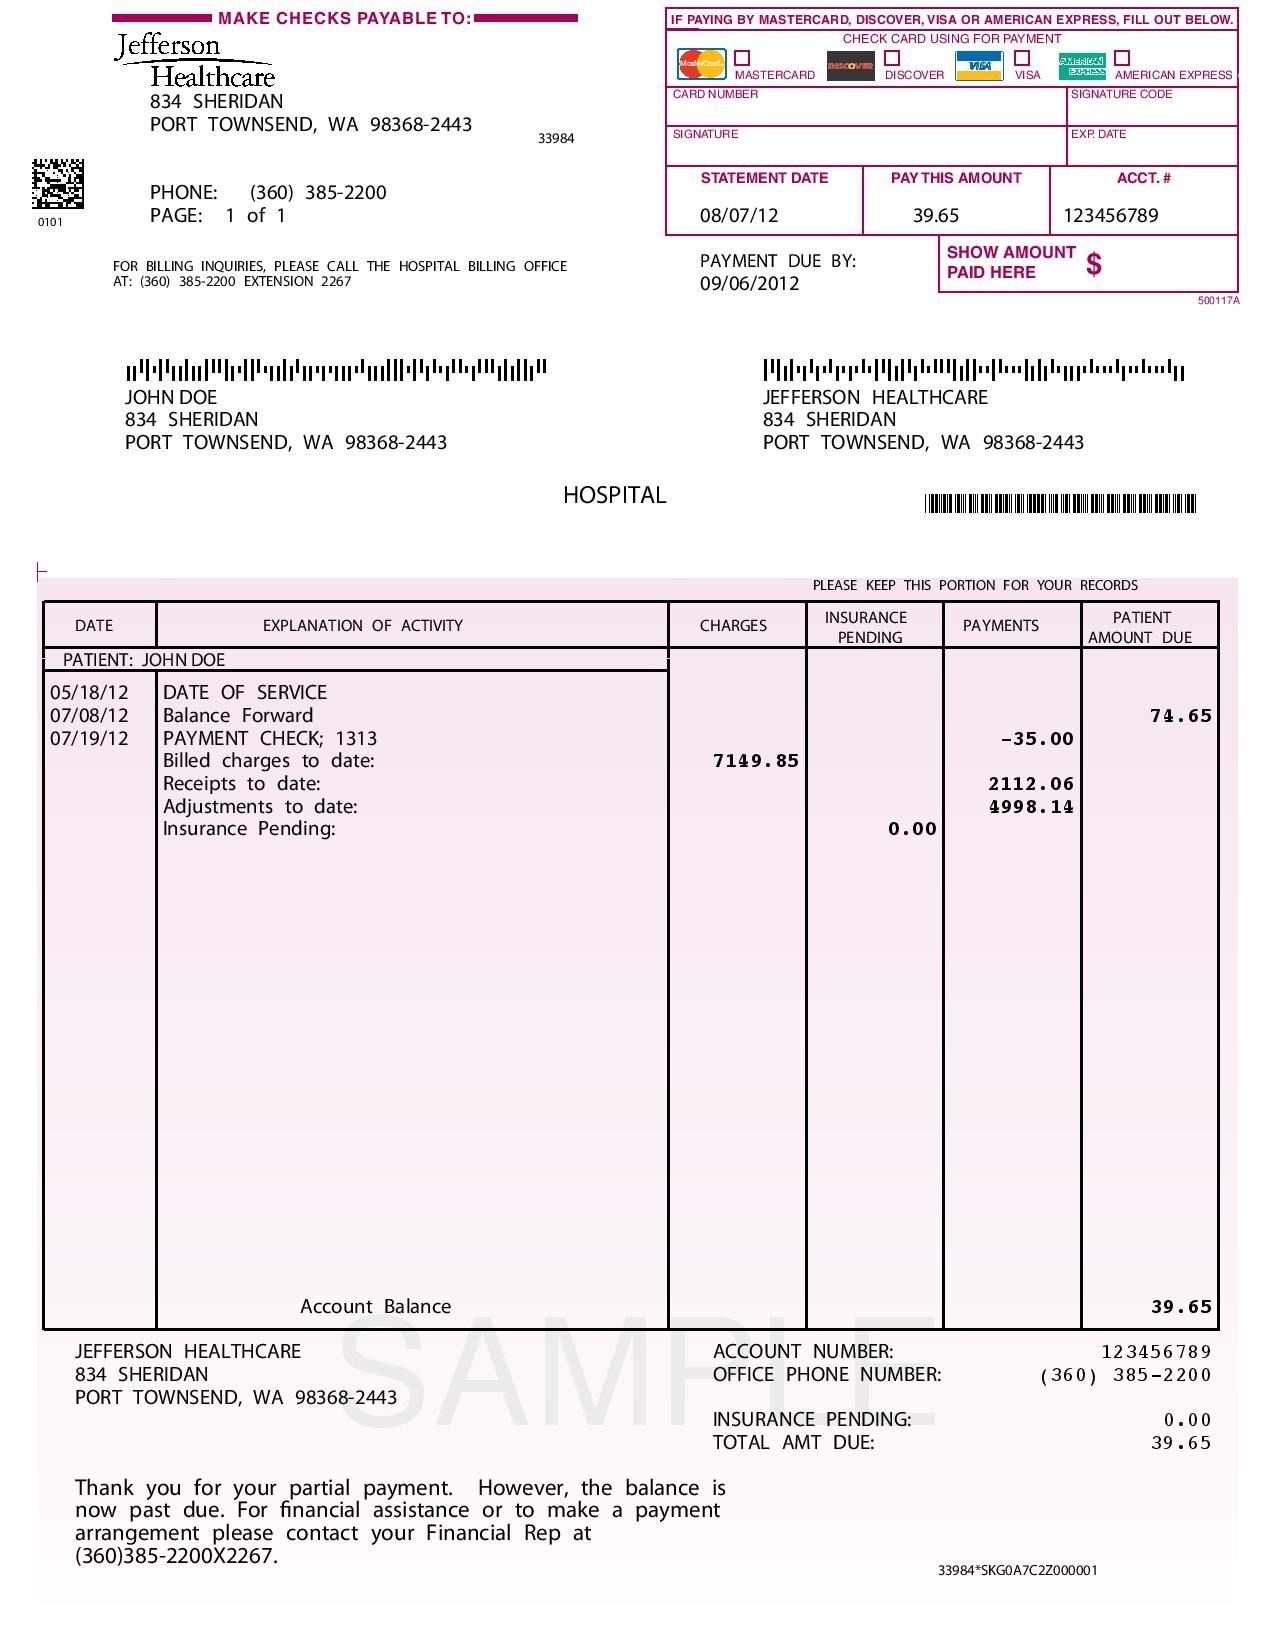 10 best images of sample of invoice for payment sample best samples of company receipt